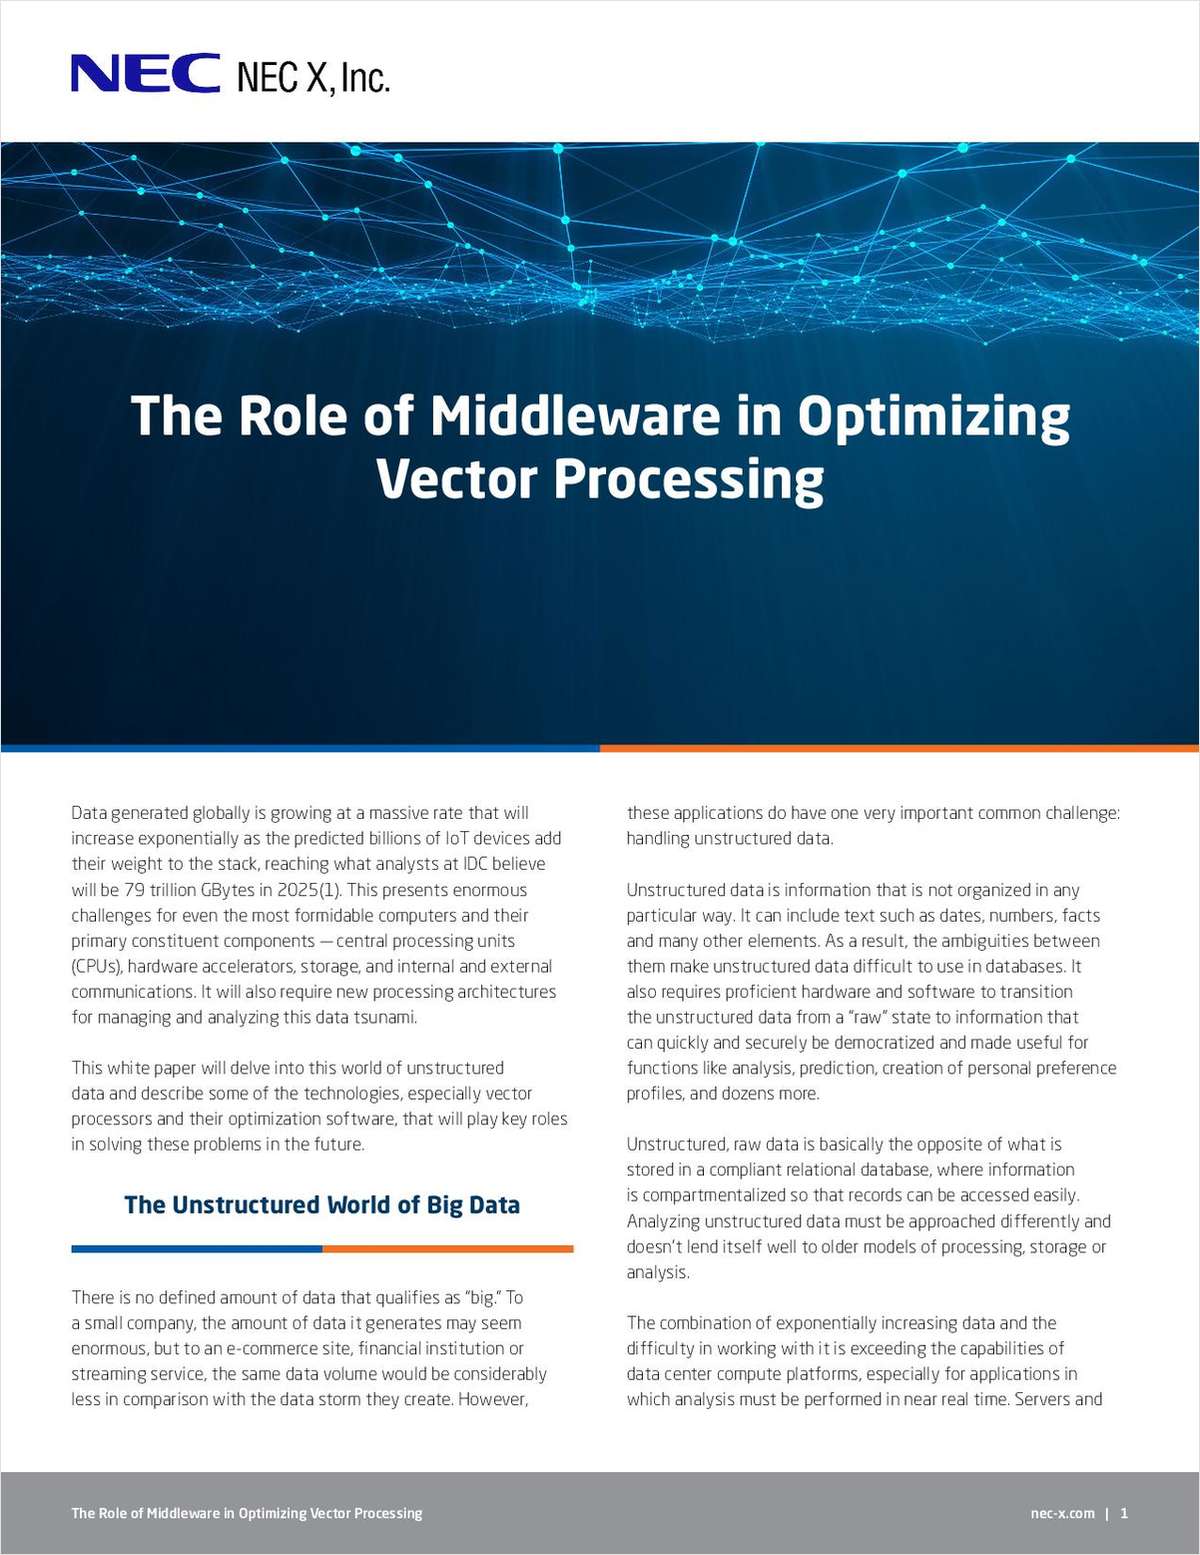 The Role of Middleware in Optimizing Vector Processing